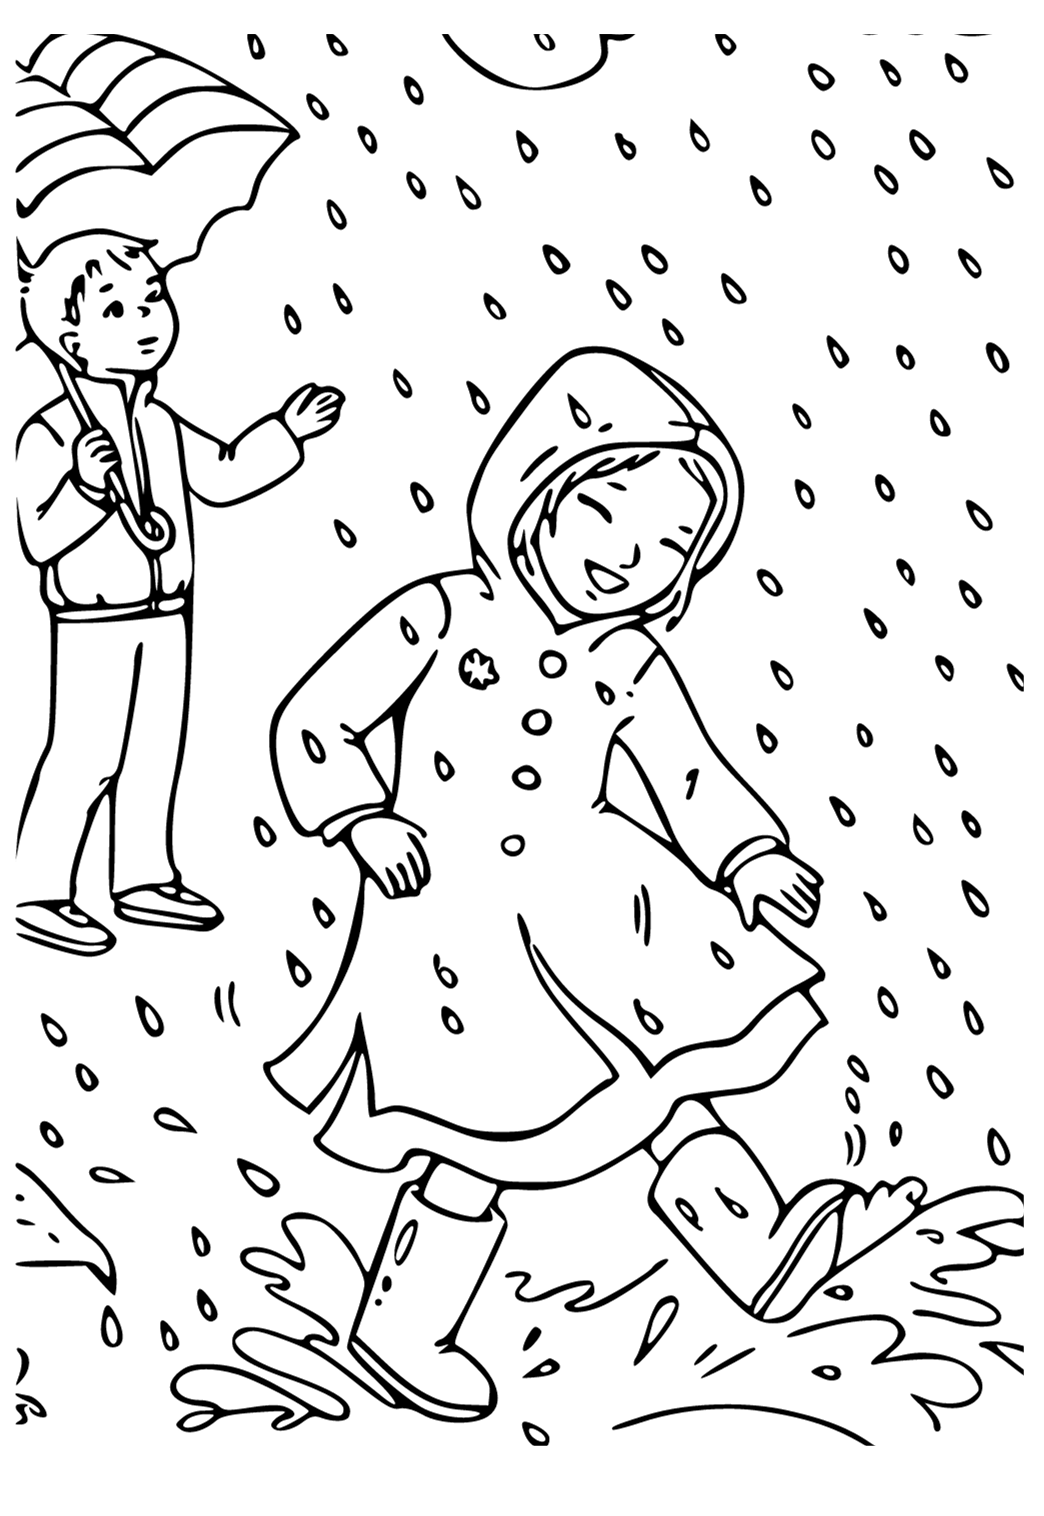 Free printable weather rain coloring page for adults and kids